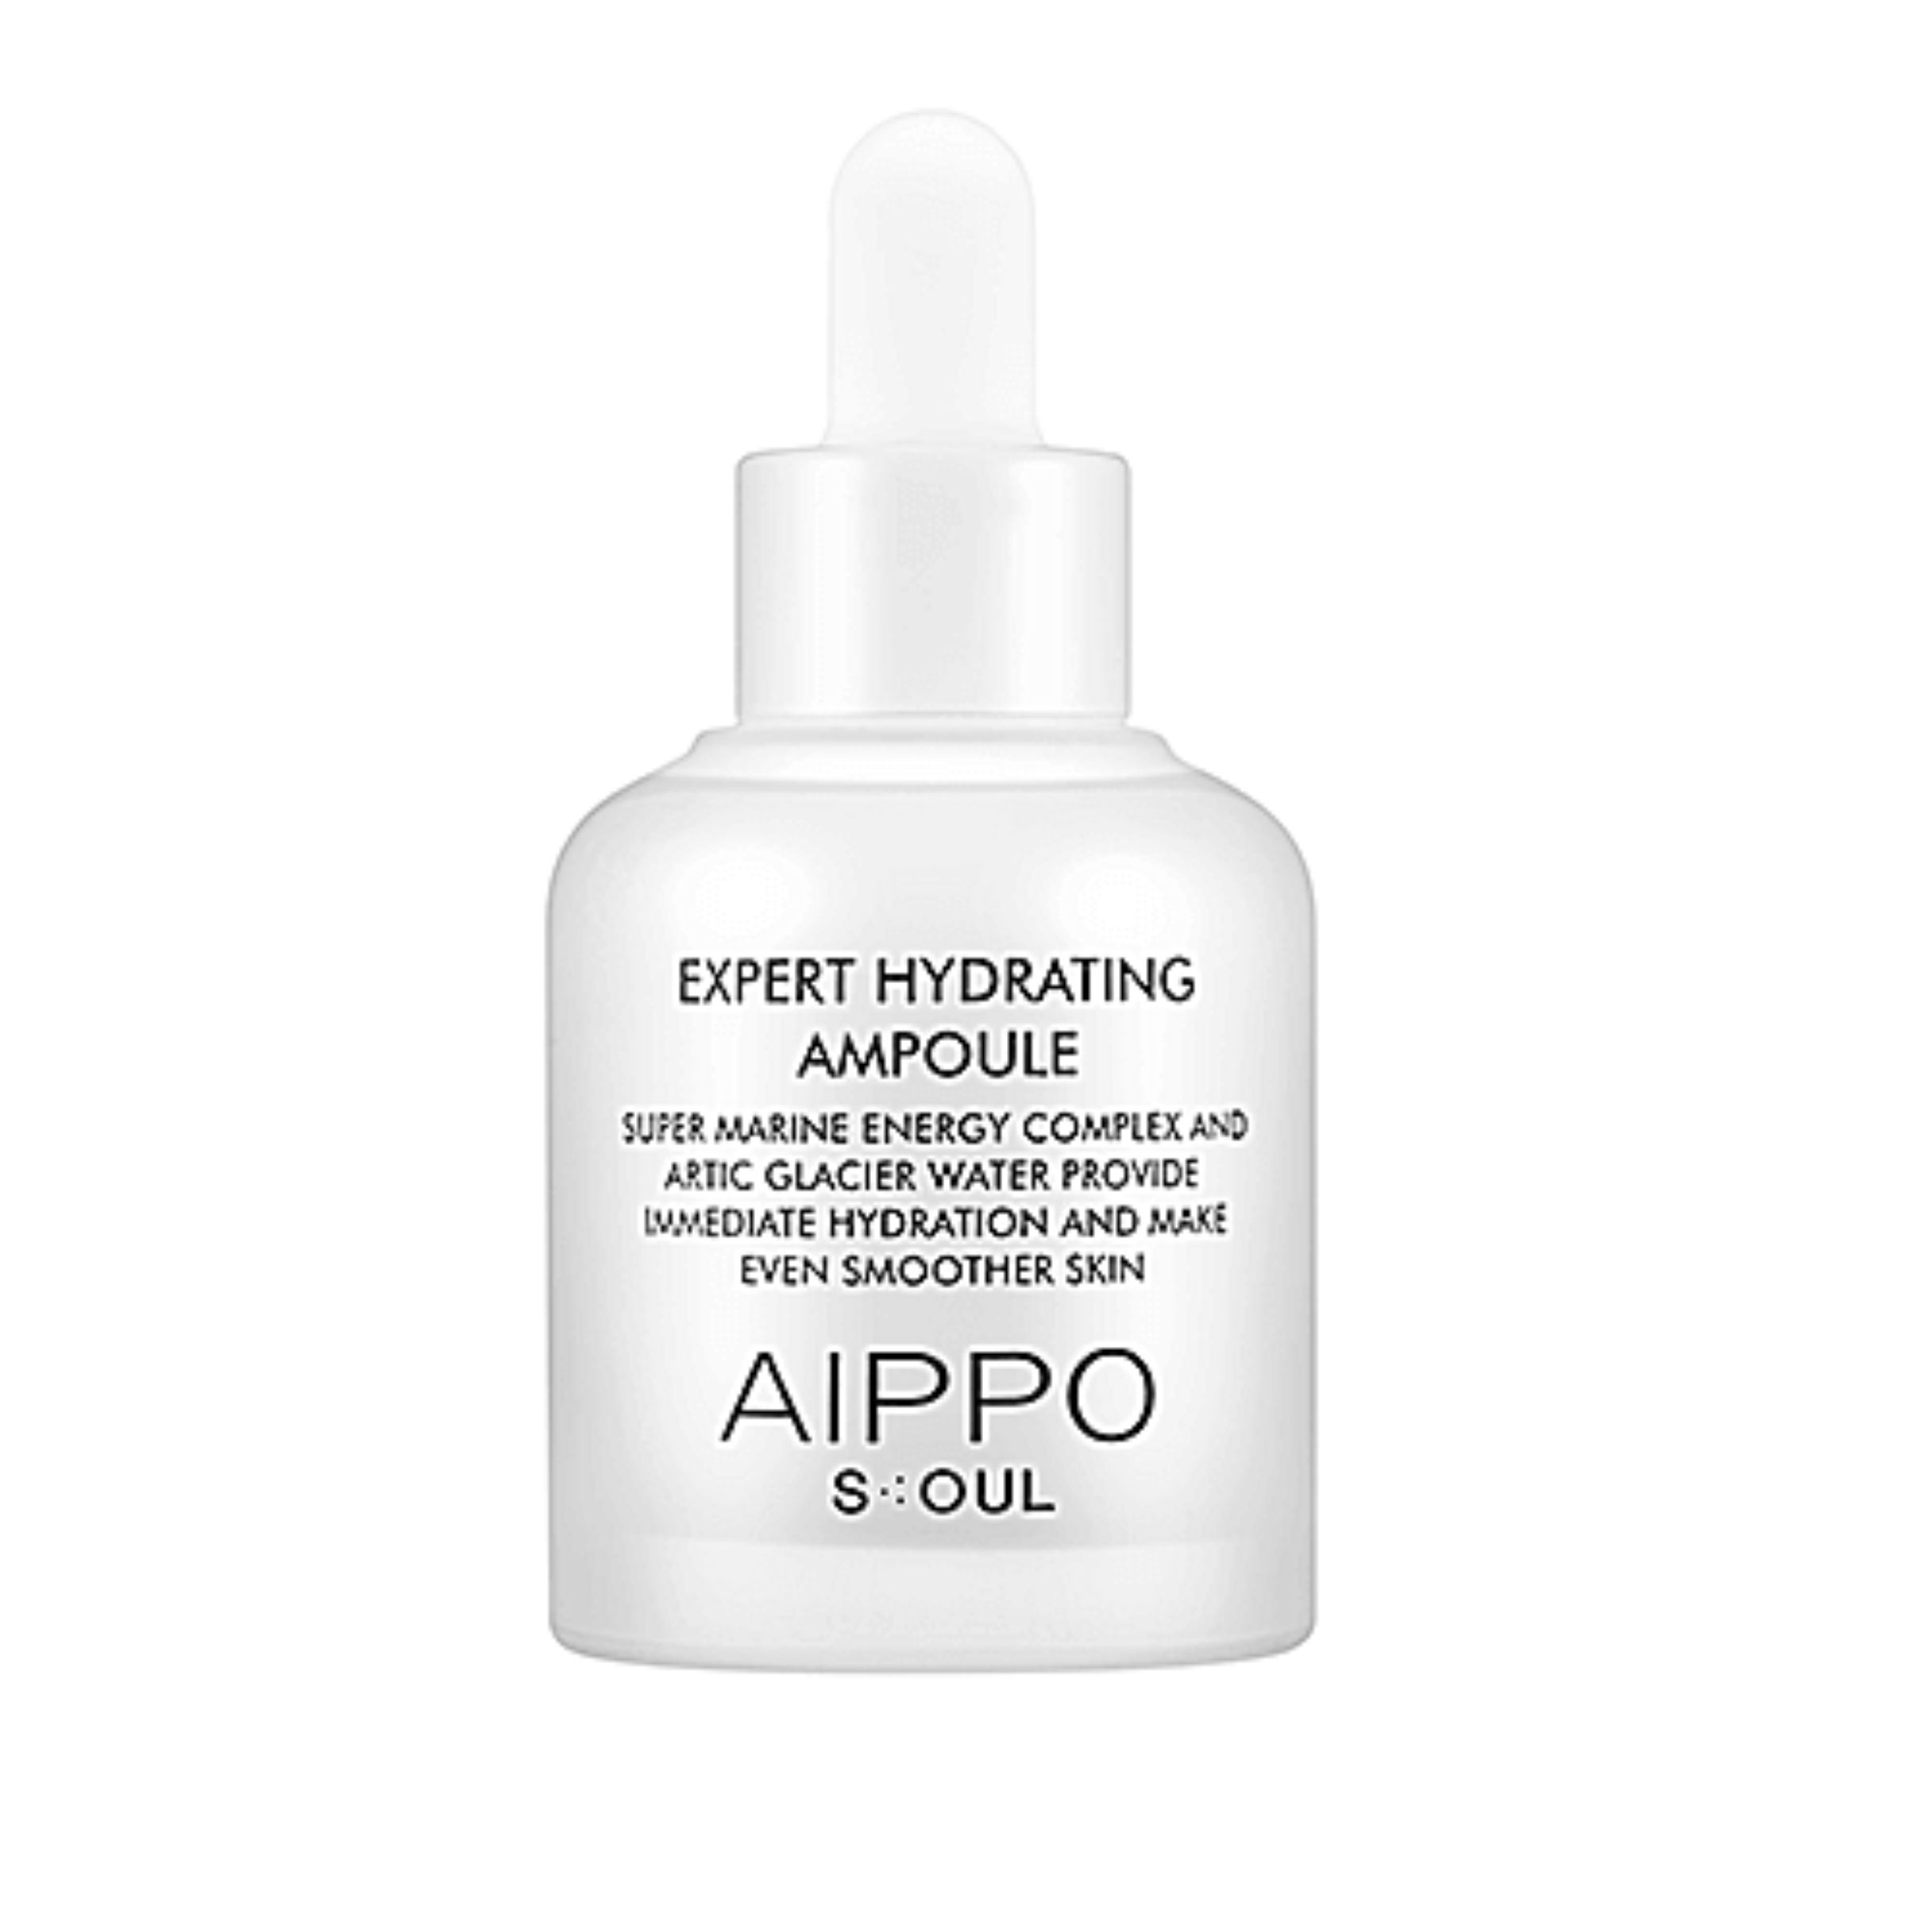 Aippo Seoul - Expert Hydrating Ampoule